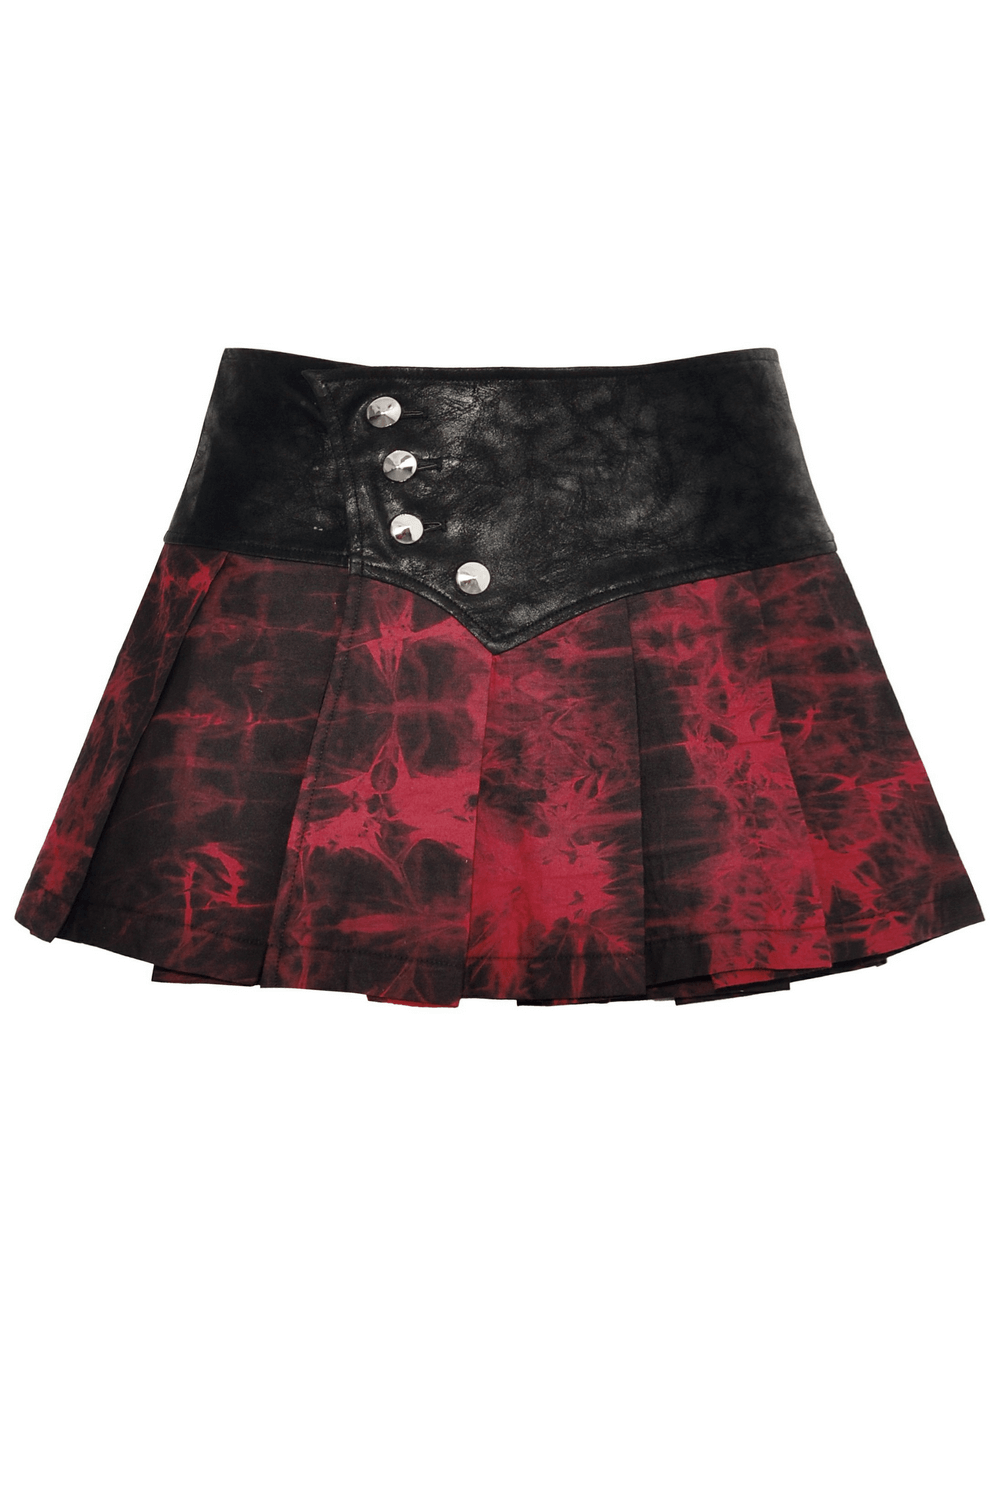 Women's Gothic Mini Skirt with Edgy Button Details